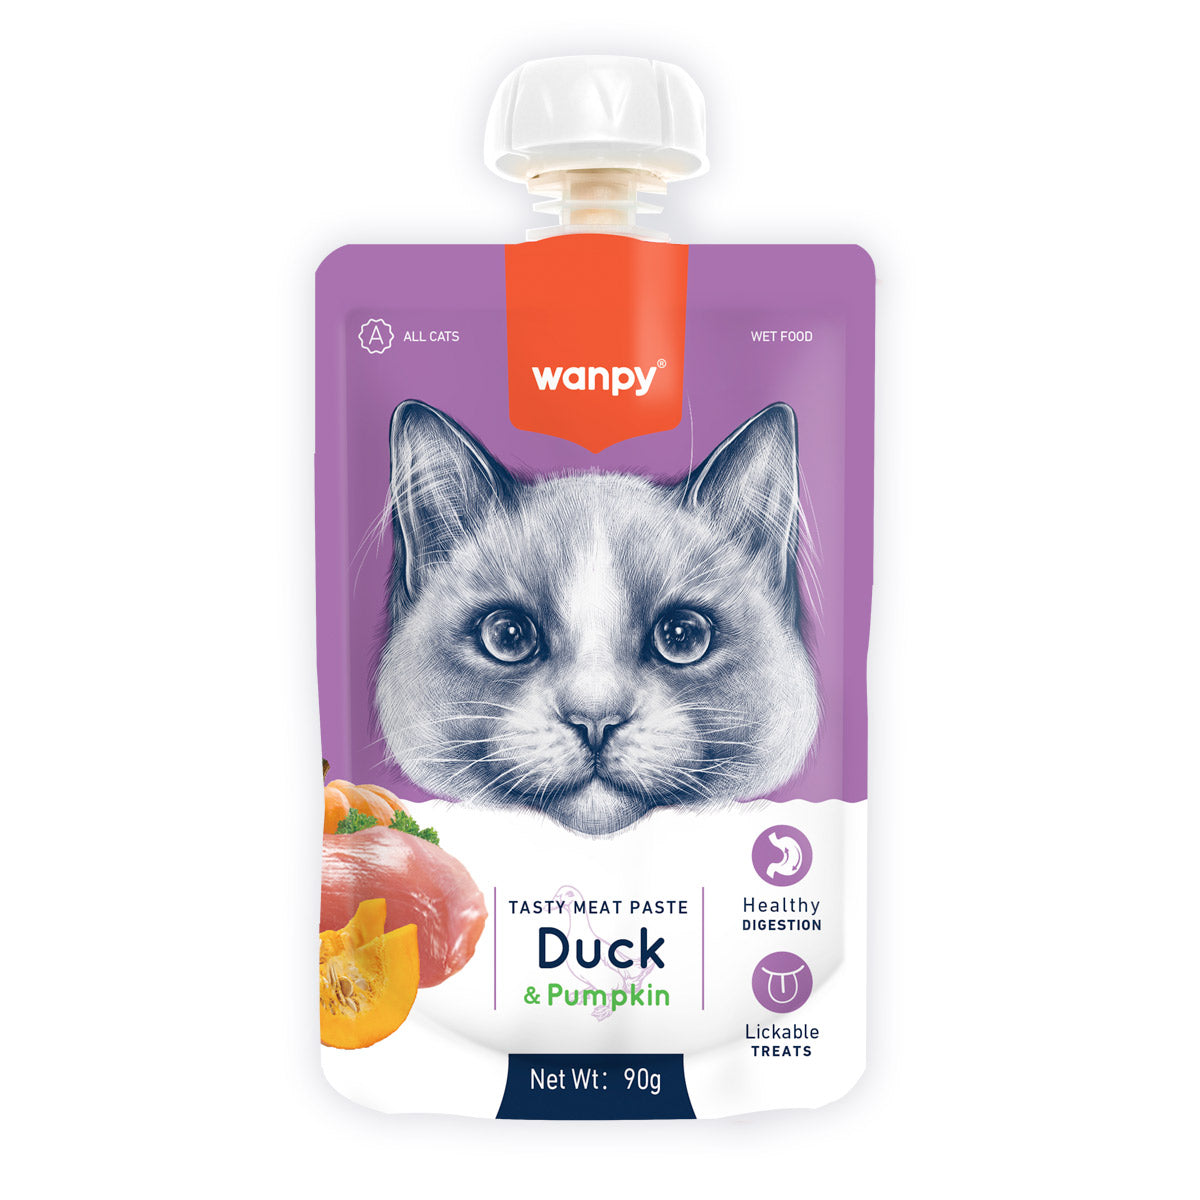 Wanpy Tasty Meat Paste Duck and Pumpkin for Cats 90g